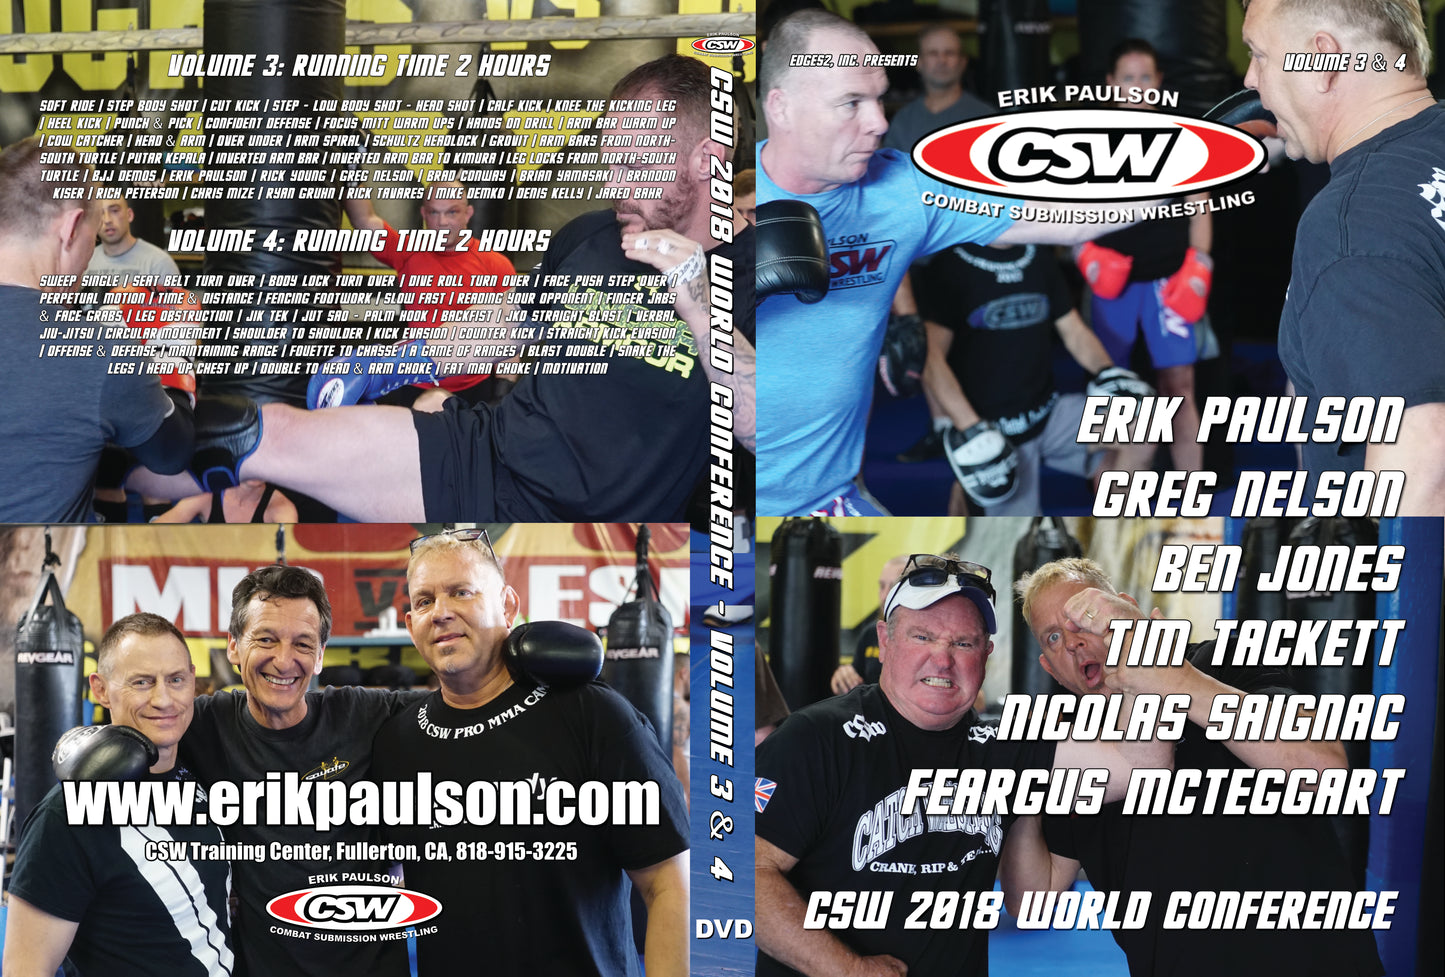 DVD - CSW 2018 World Conference - 4 DVD Set